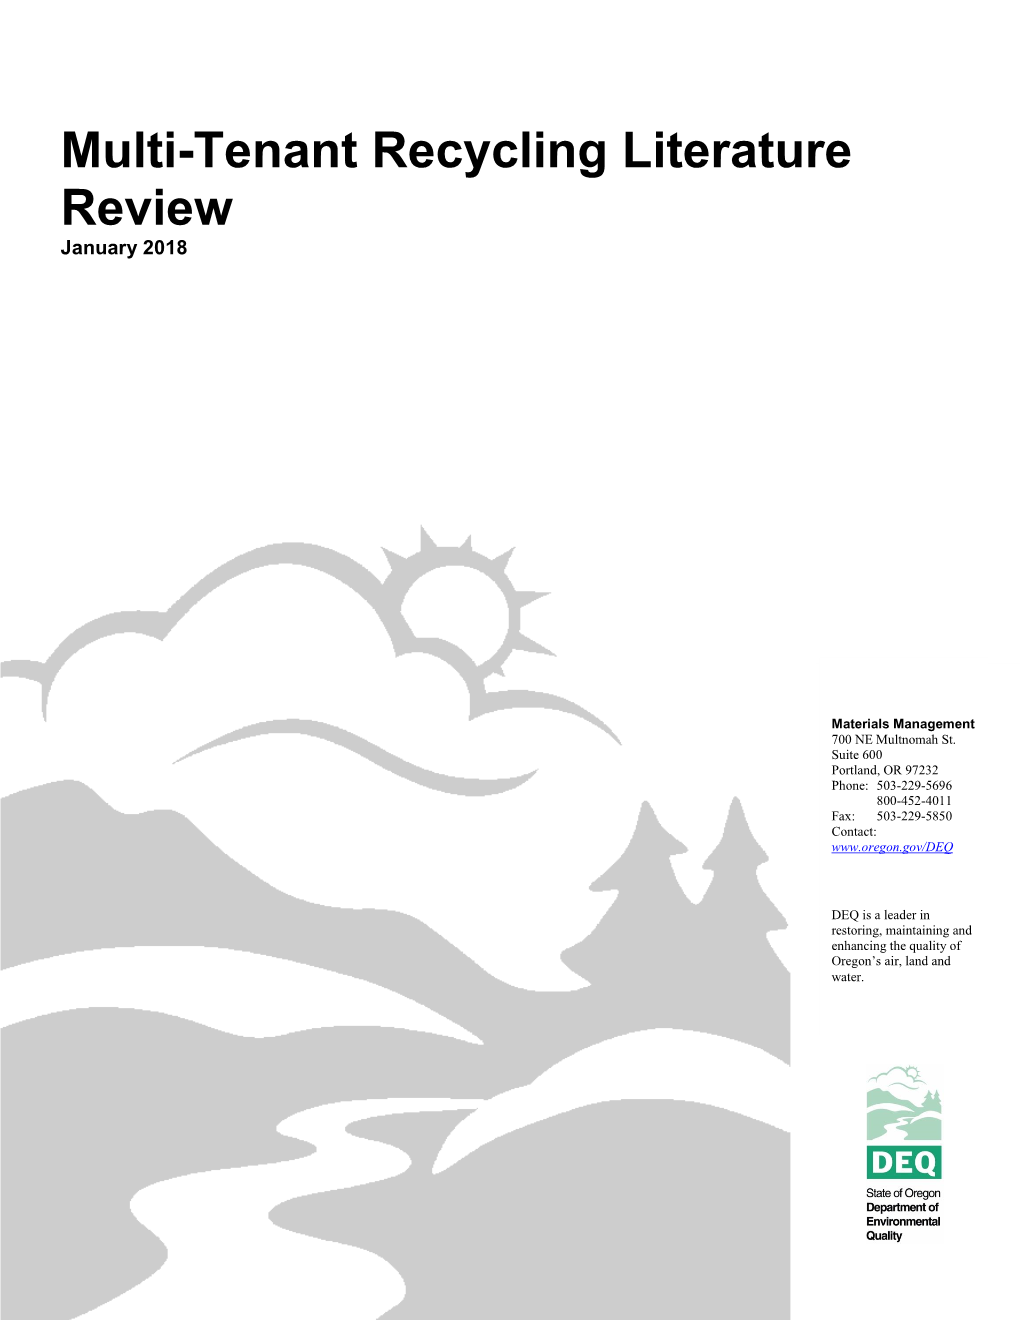 Multi-Tenant Recycling Literature Review January 2018